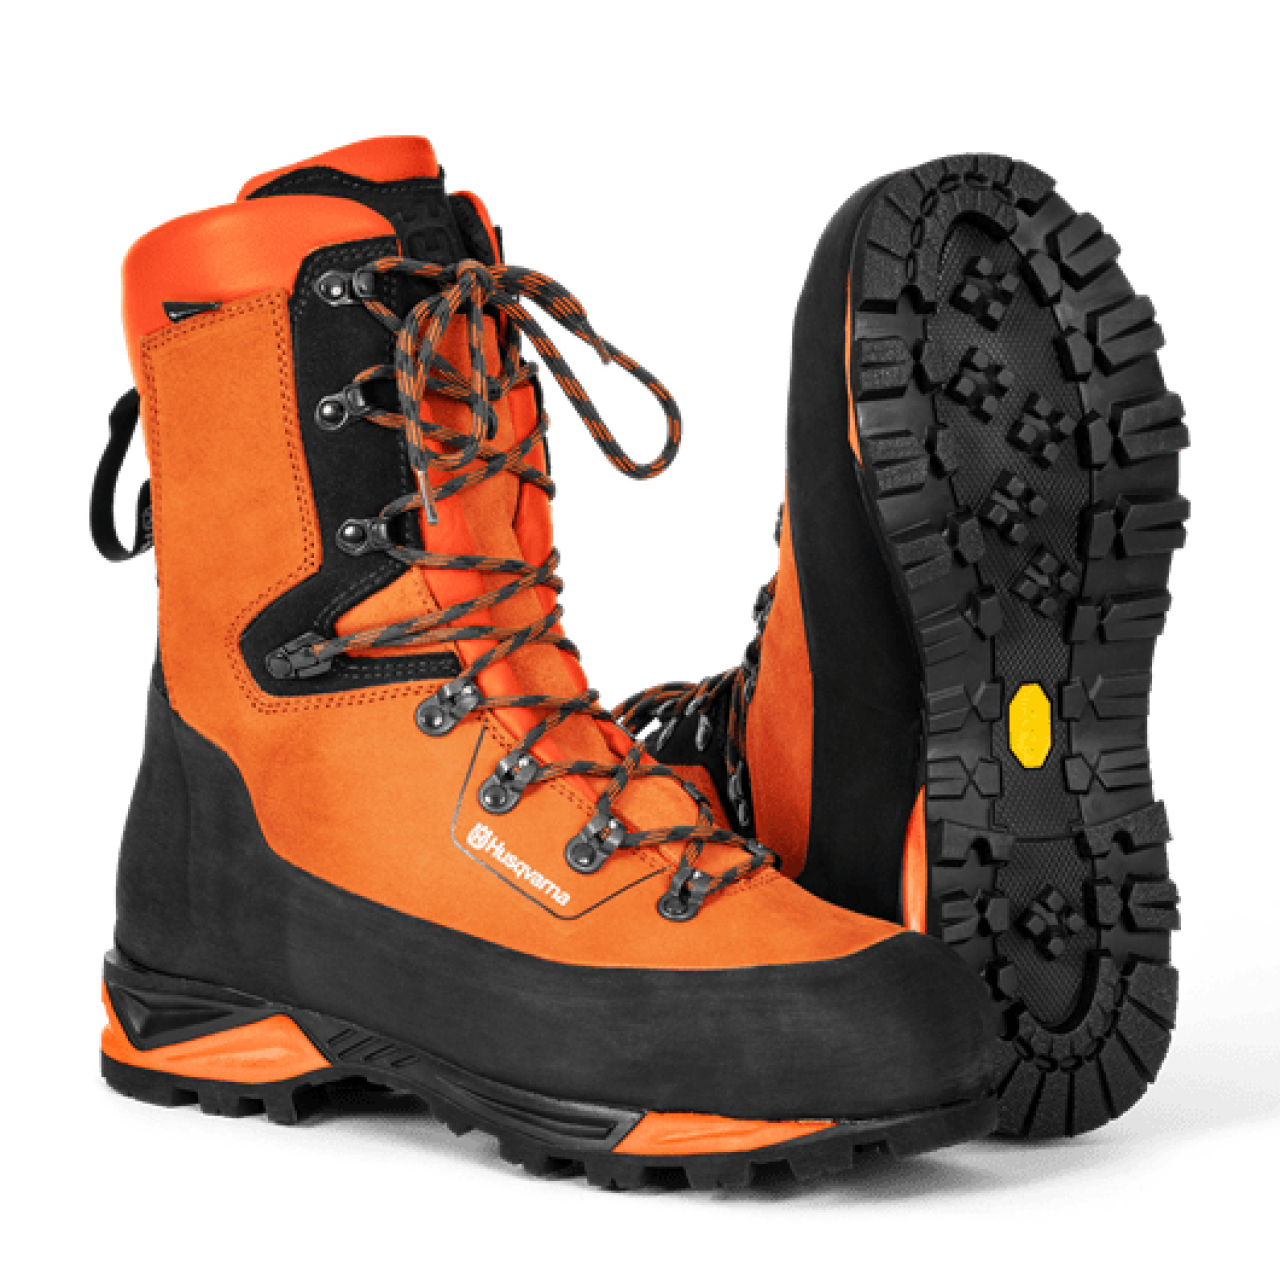 Stiefel Technical 24 Level 2 Gr. 39